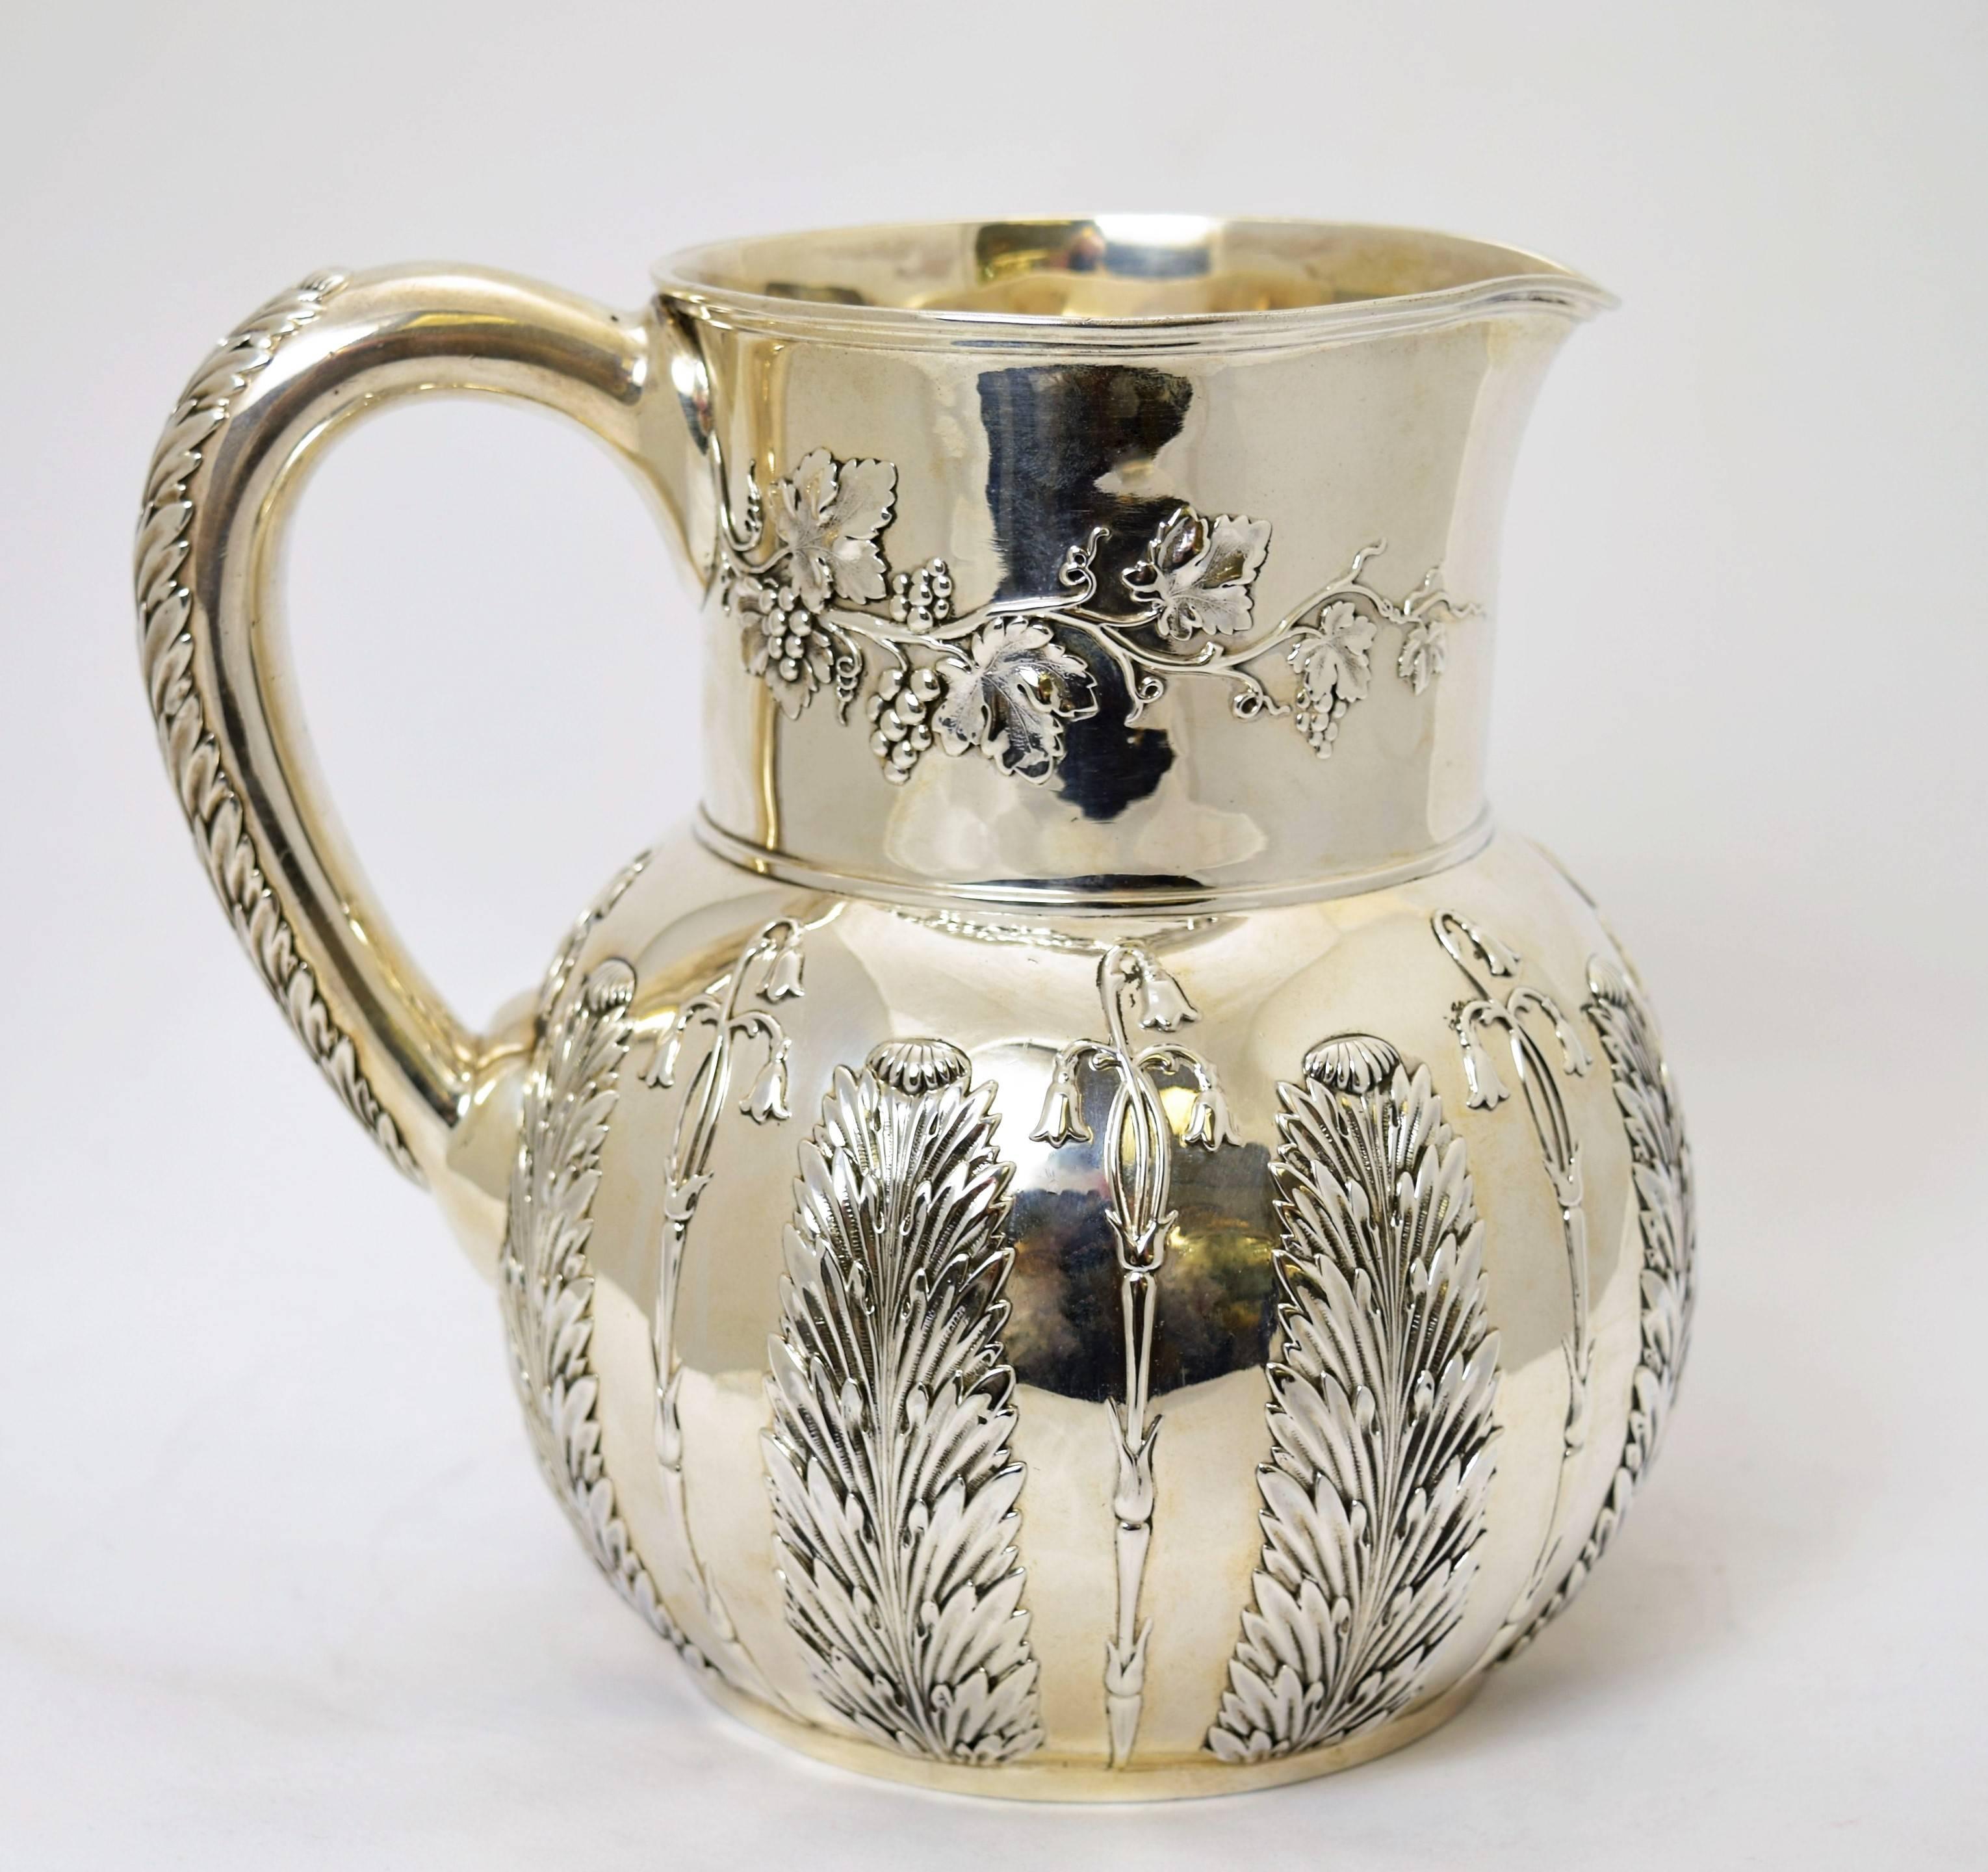 American Tiffany & Co. Sterling Silver Water Pitcher, circa 1885